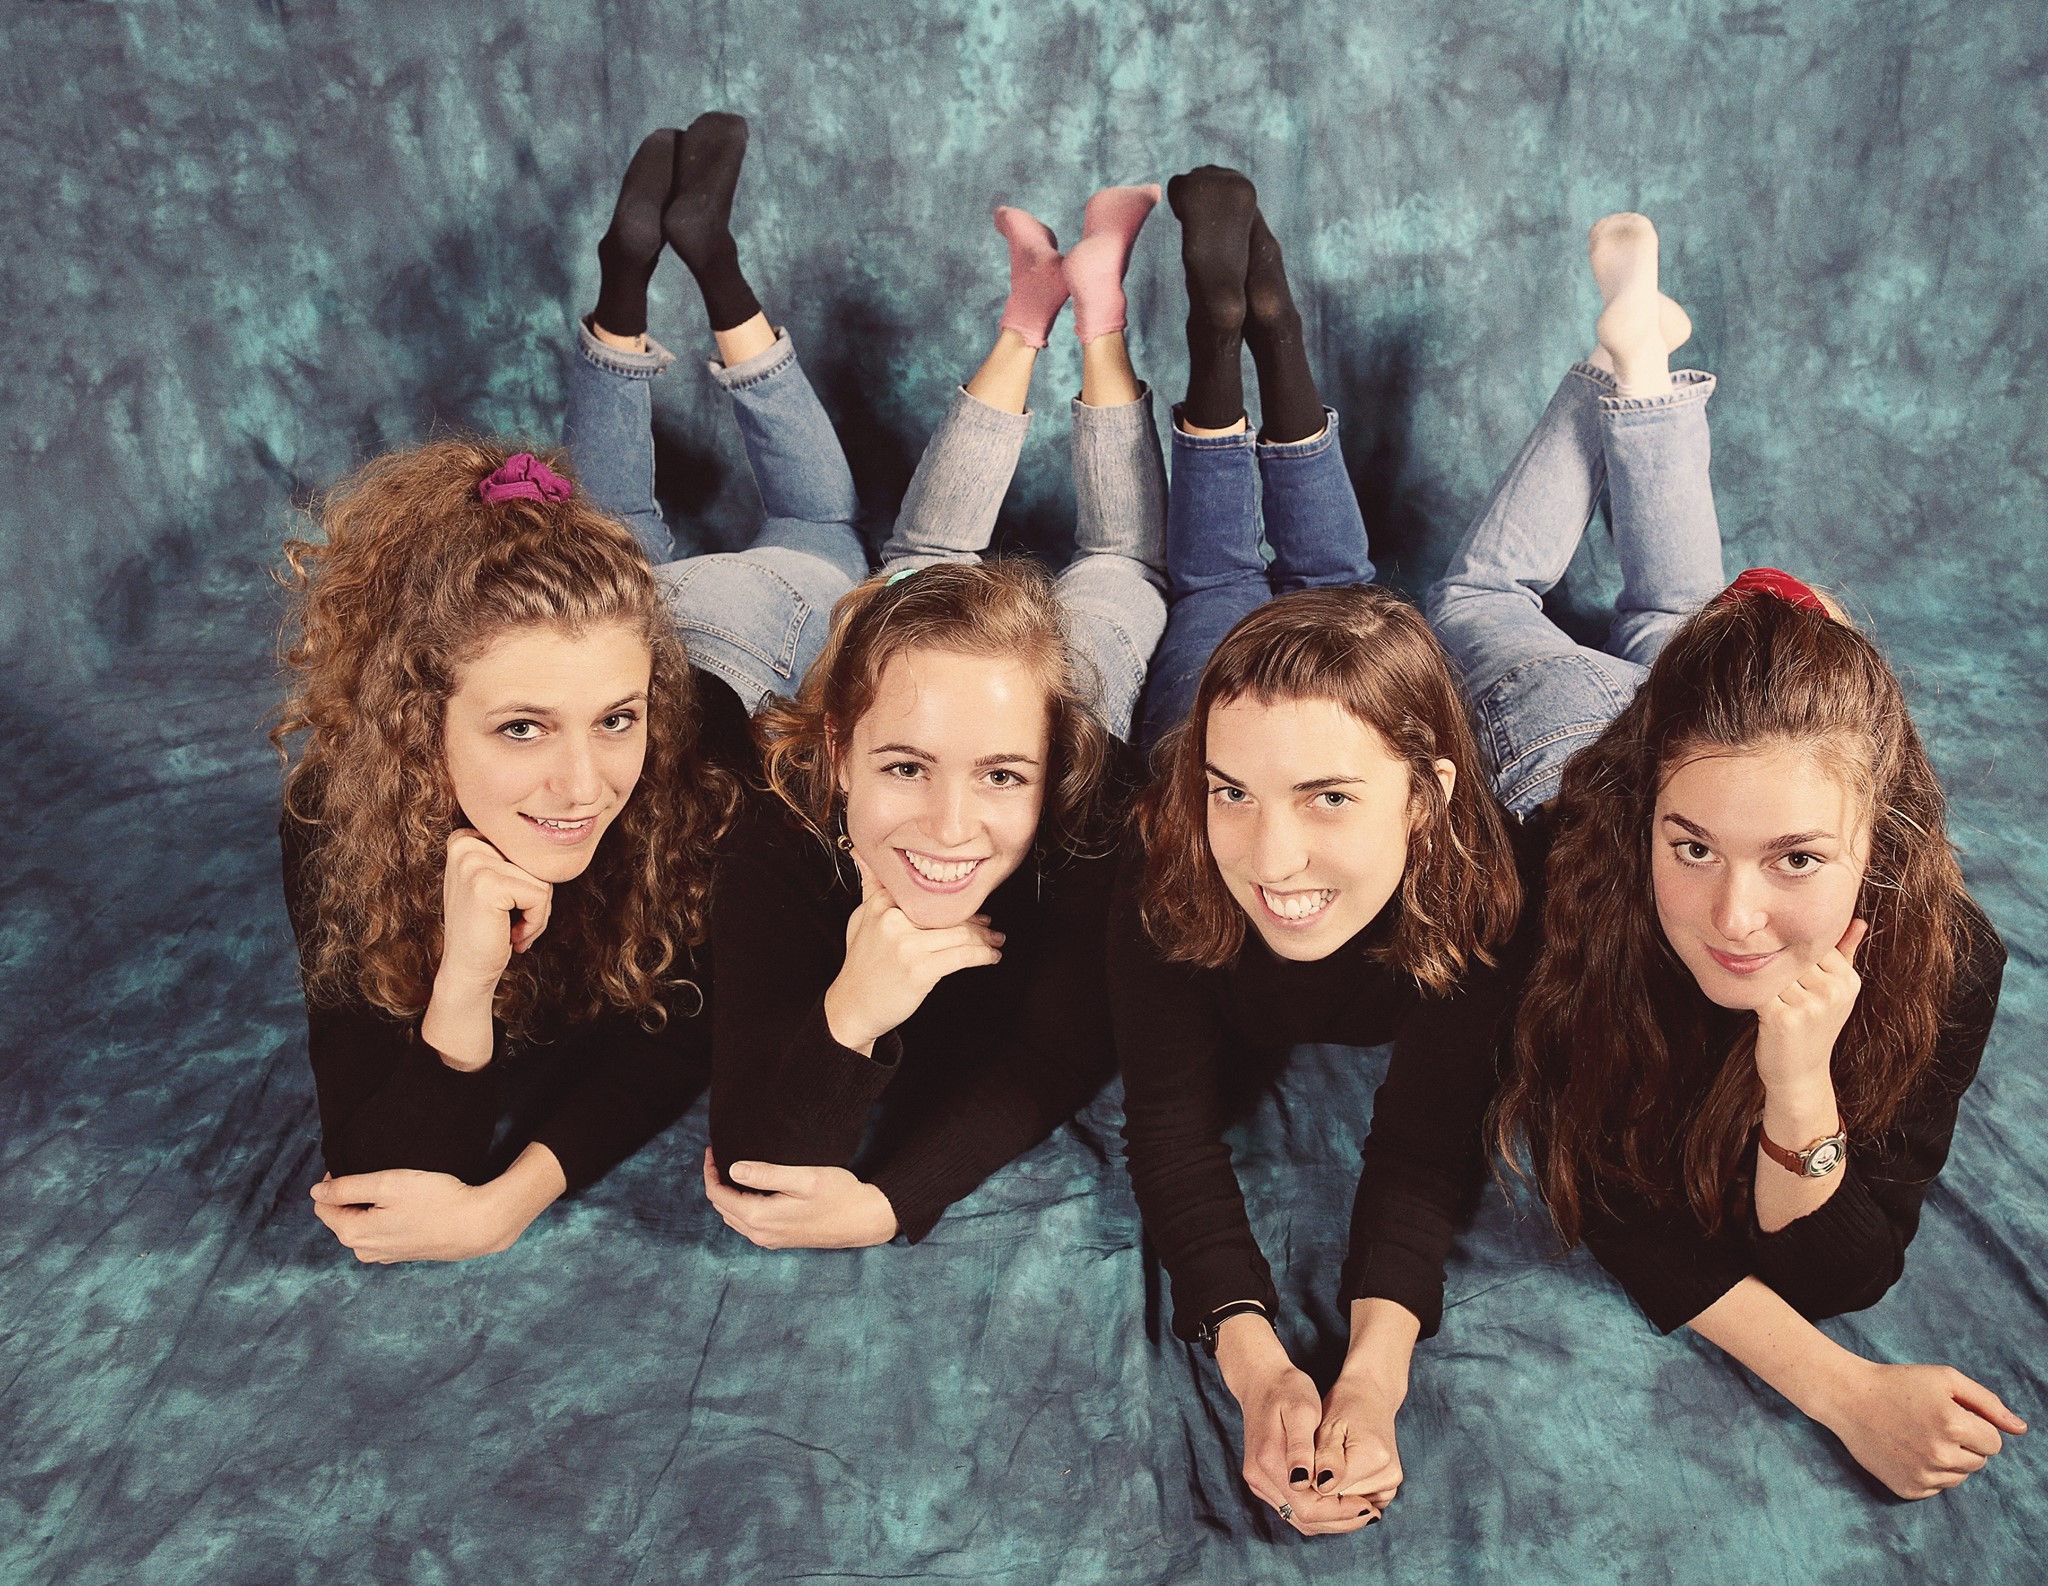 Chastity Belt – “Time To Go”